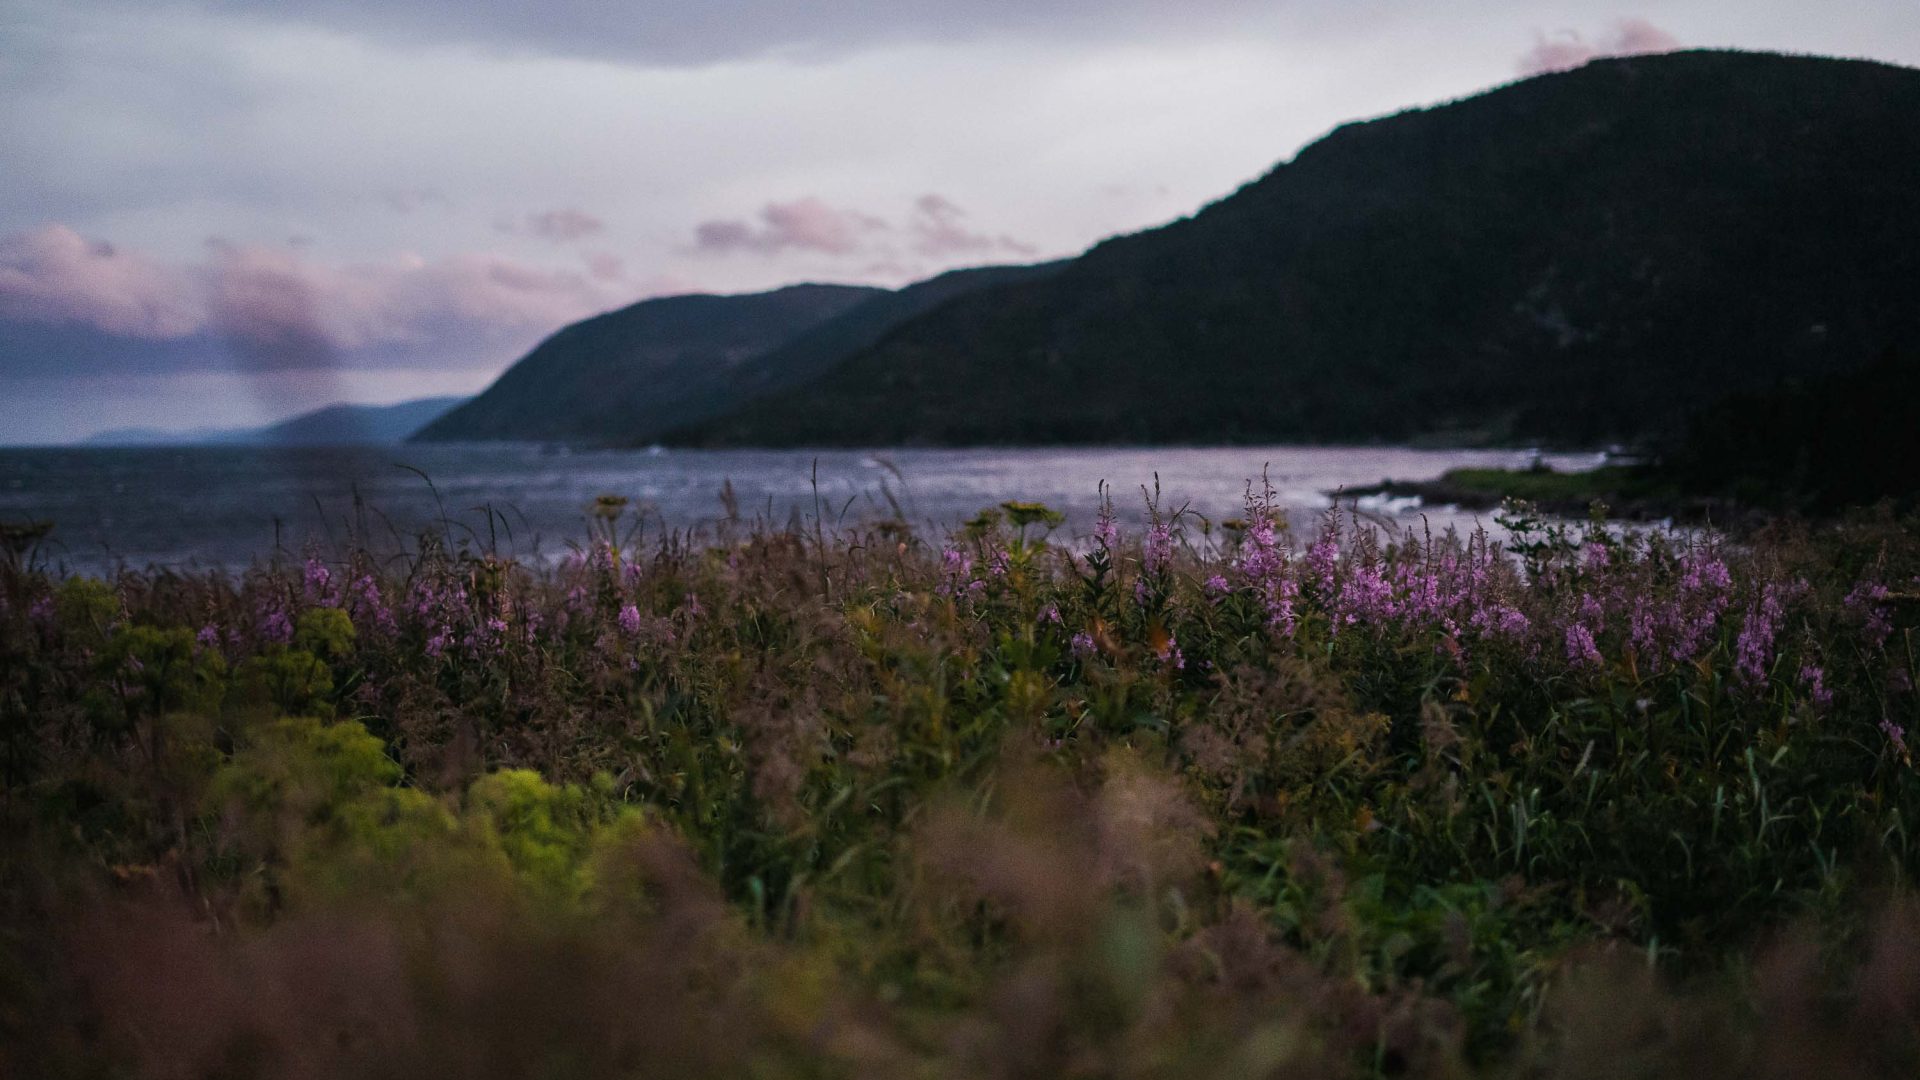 Soft light over the purple flowers and still water seen in Newfoundland..